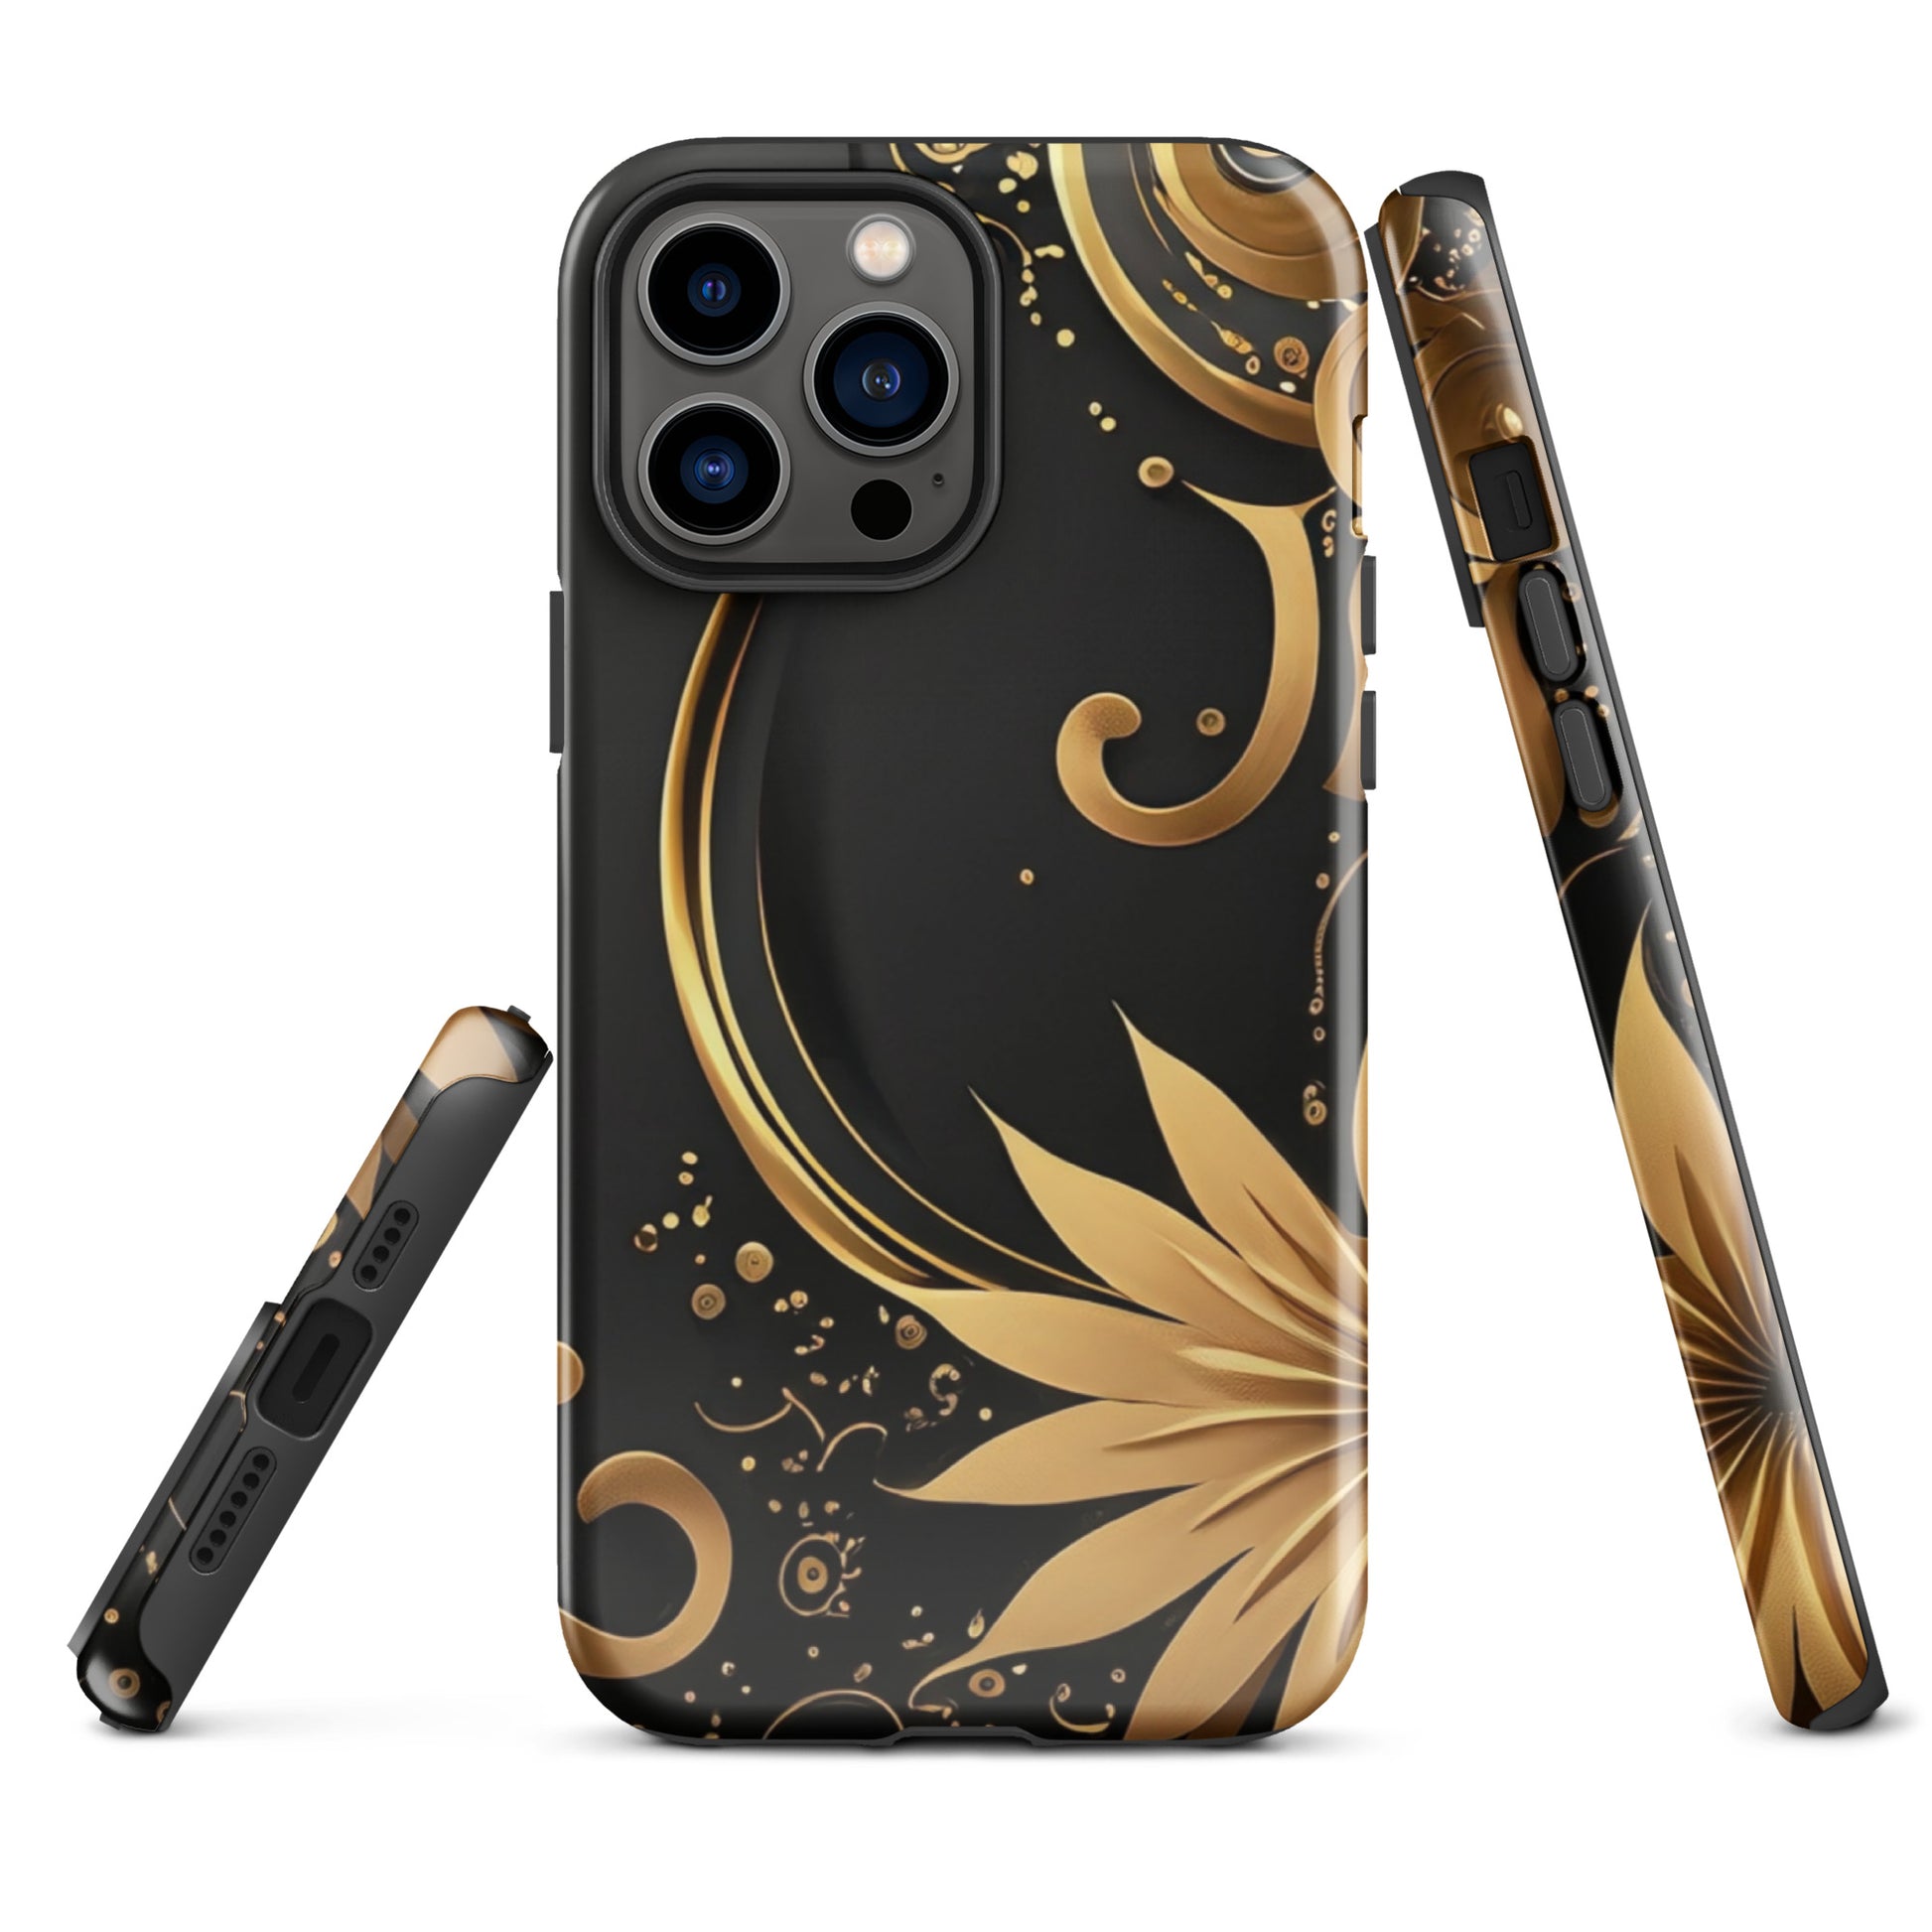 A Golden Flower Case for the iPhone 13 Pro Max